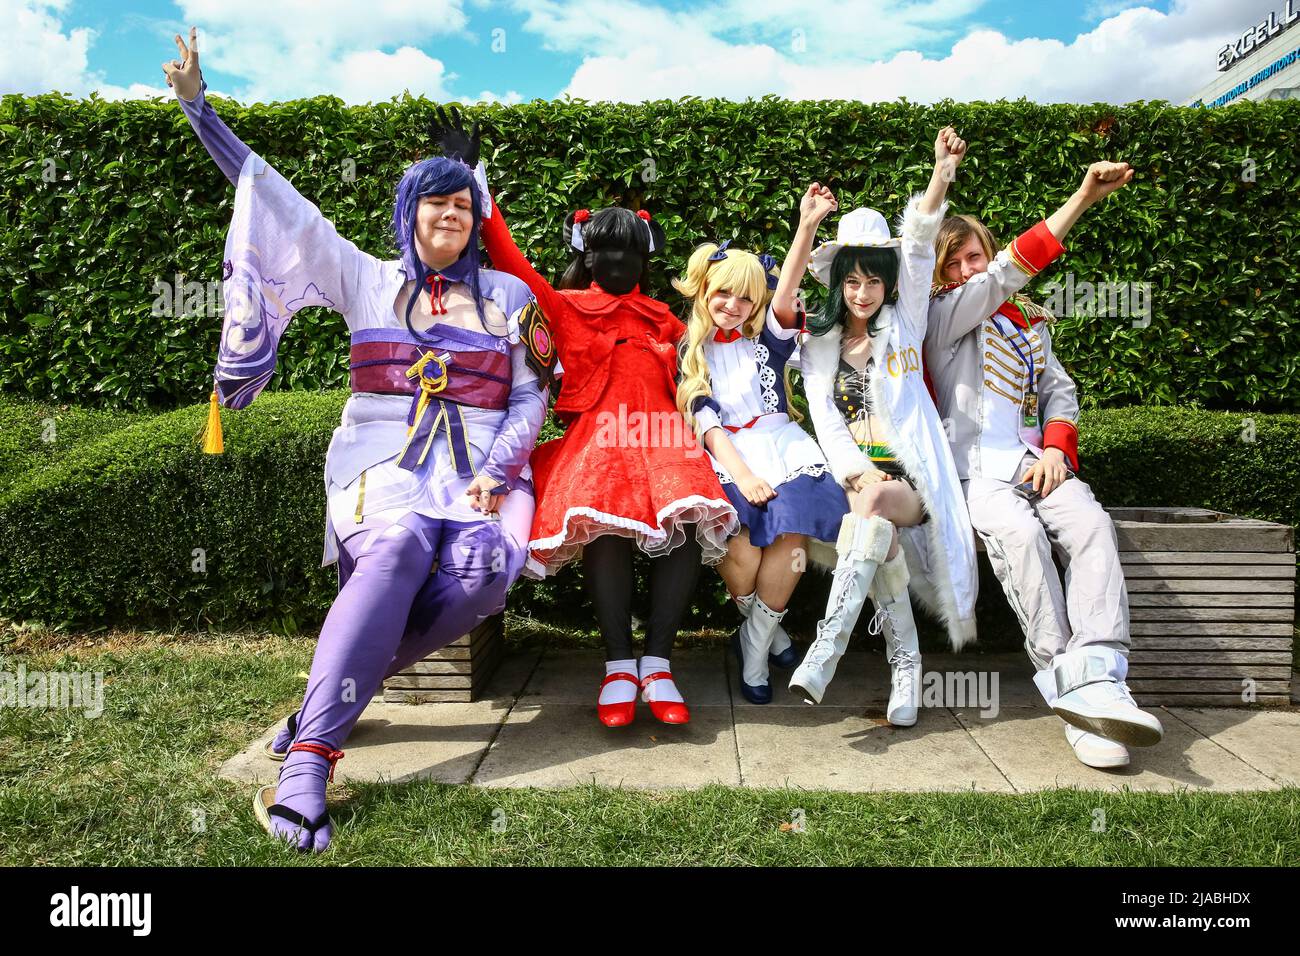 Whawhawhawha.info | Soul eater cosplay, Soul eater, Group cosplay